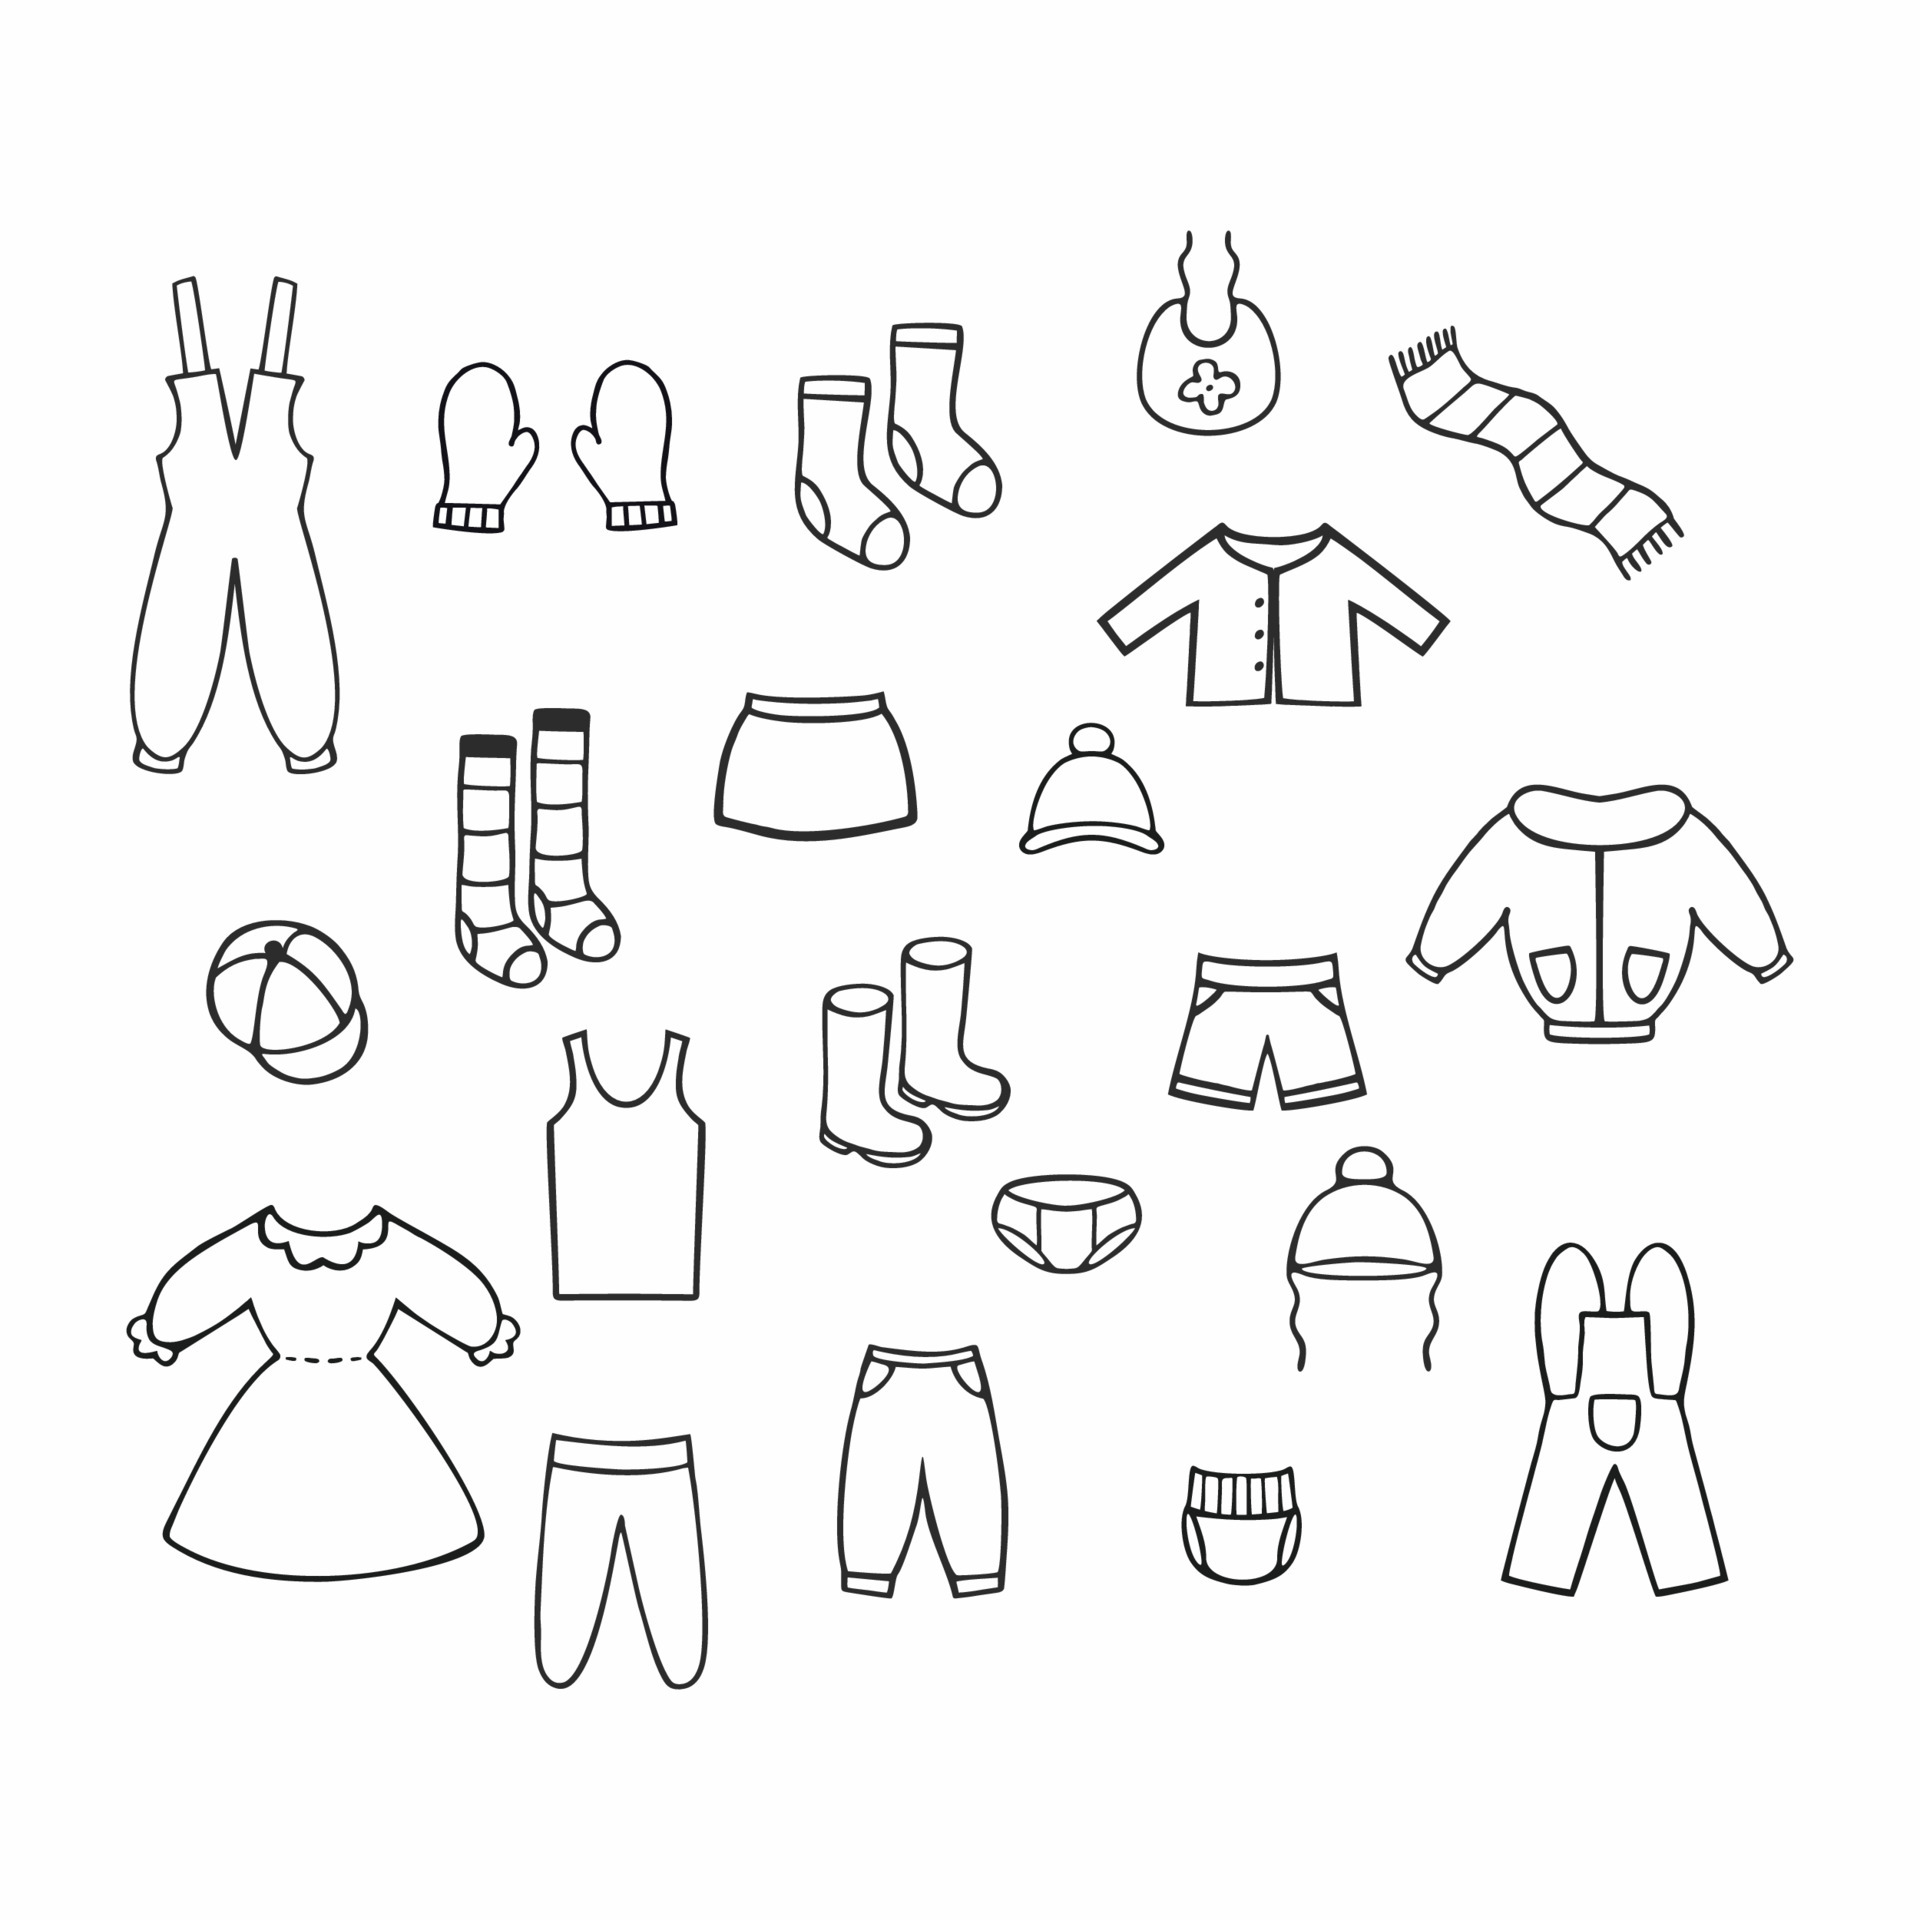 Kids Clothes Stock Illustrations  66655 Kids Clothes Stock Illustrations  Vectors  Clipart  Dreamstime